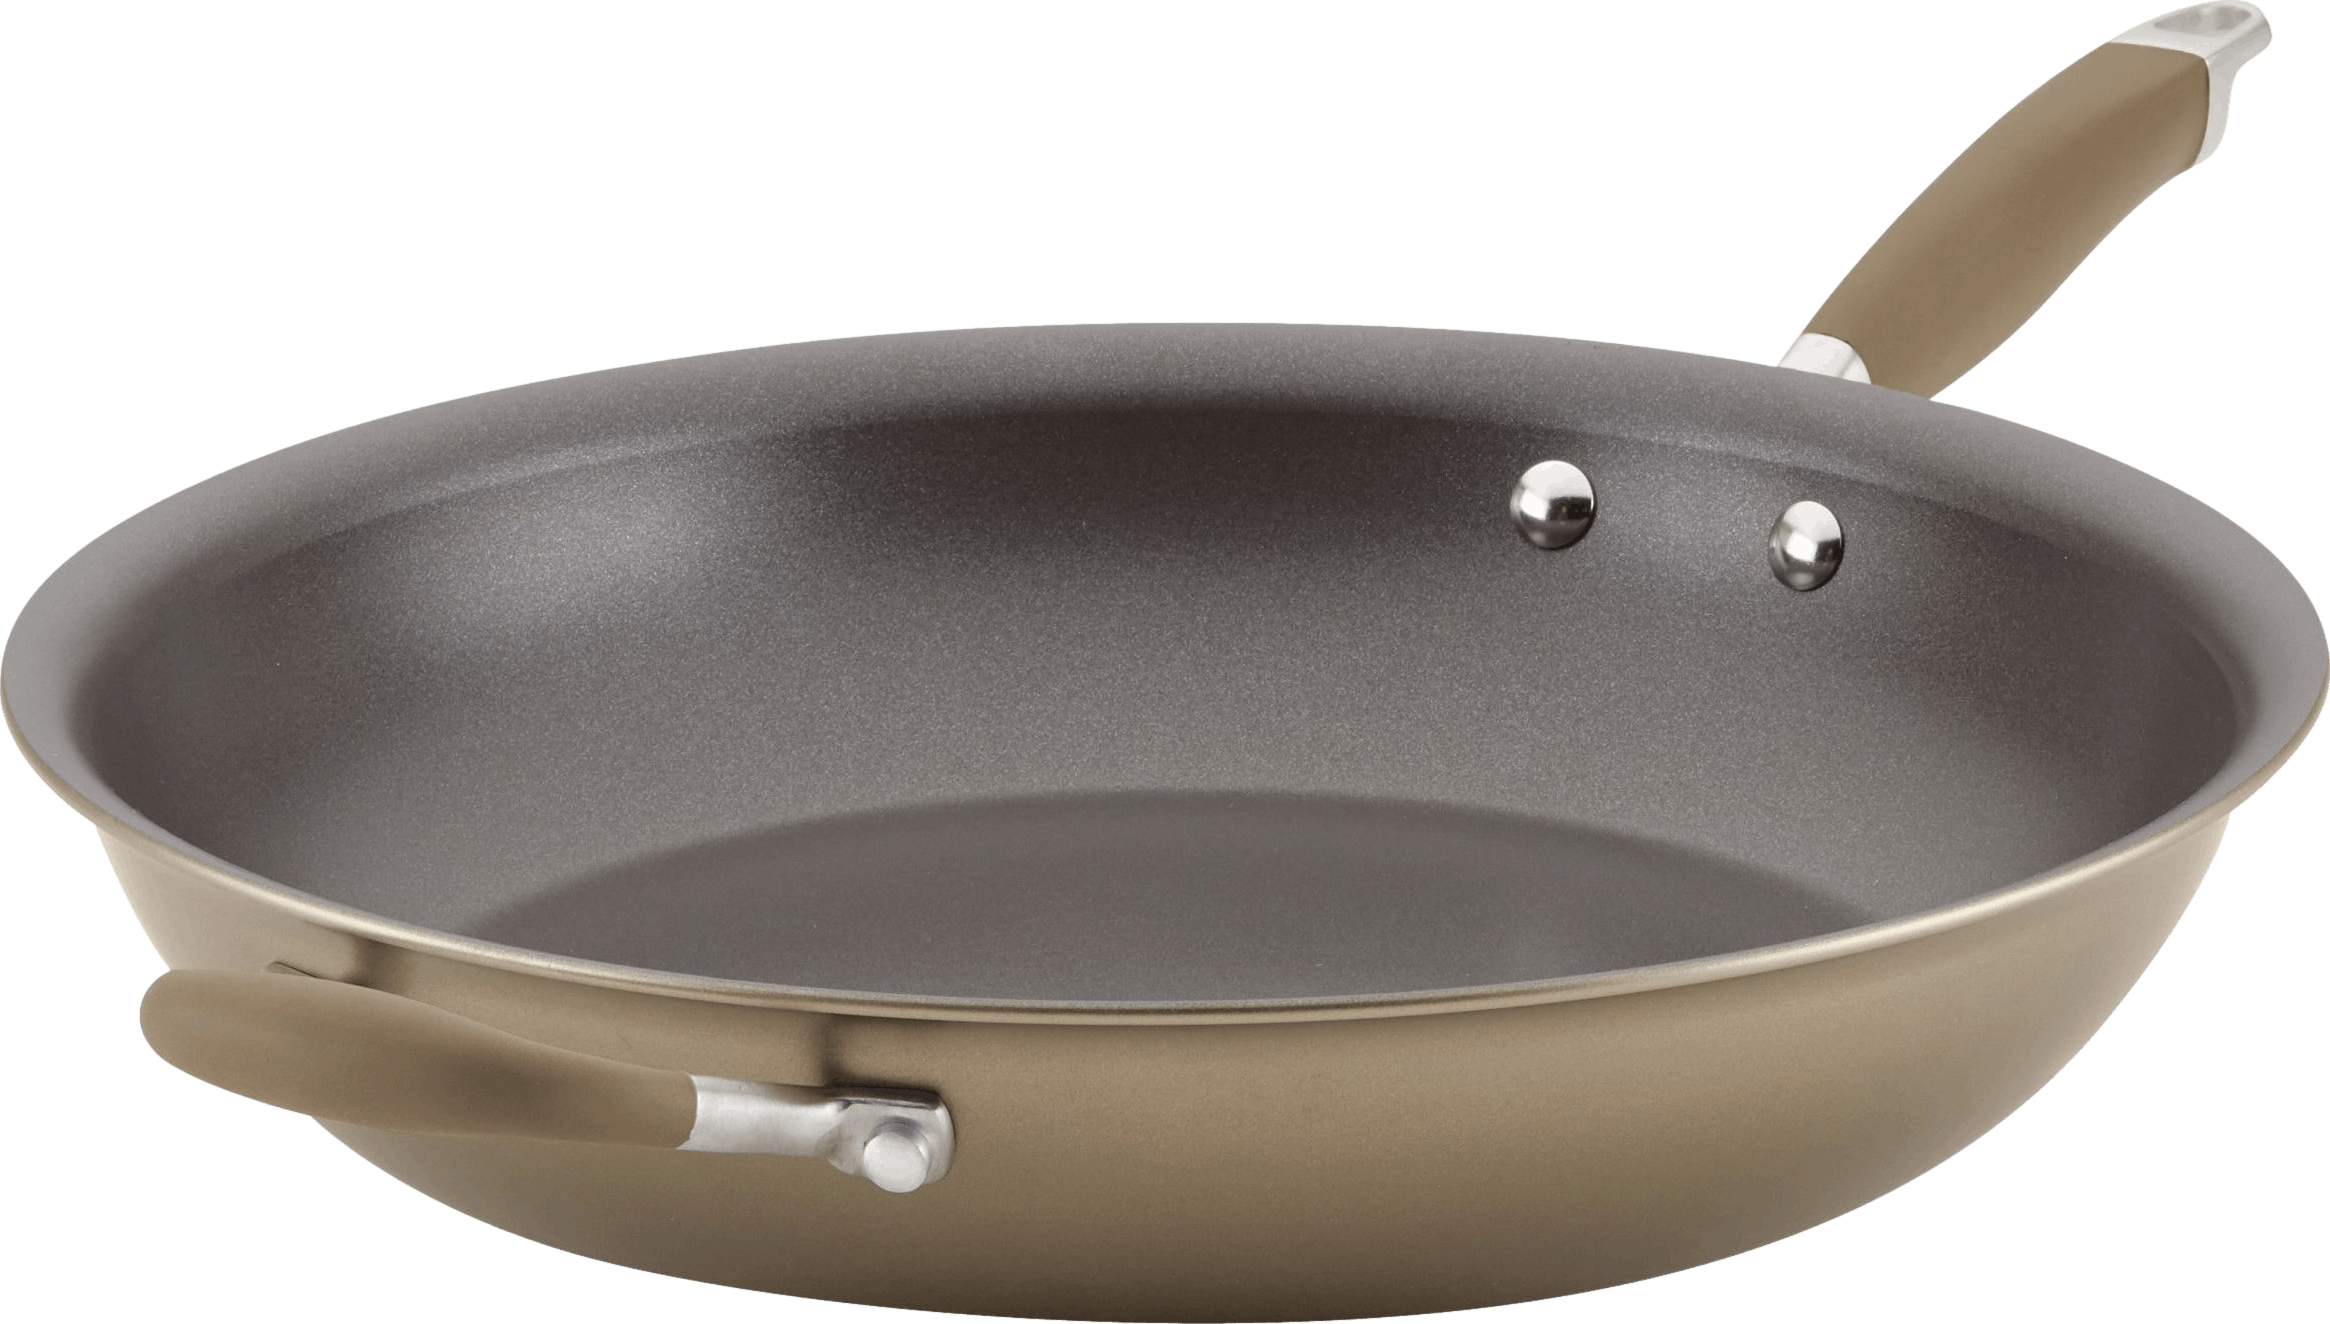 Anolon Accolade Forged Hard-Anodized Nonstick Deep Frying Pan with